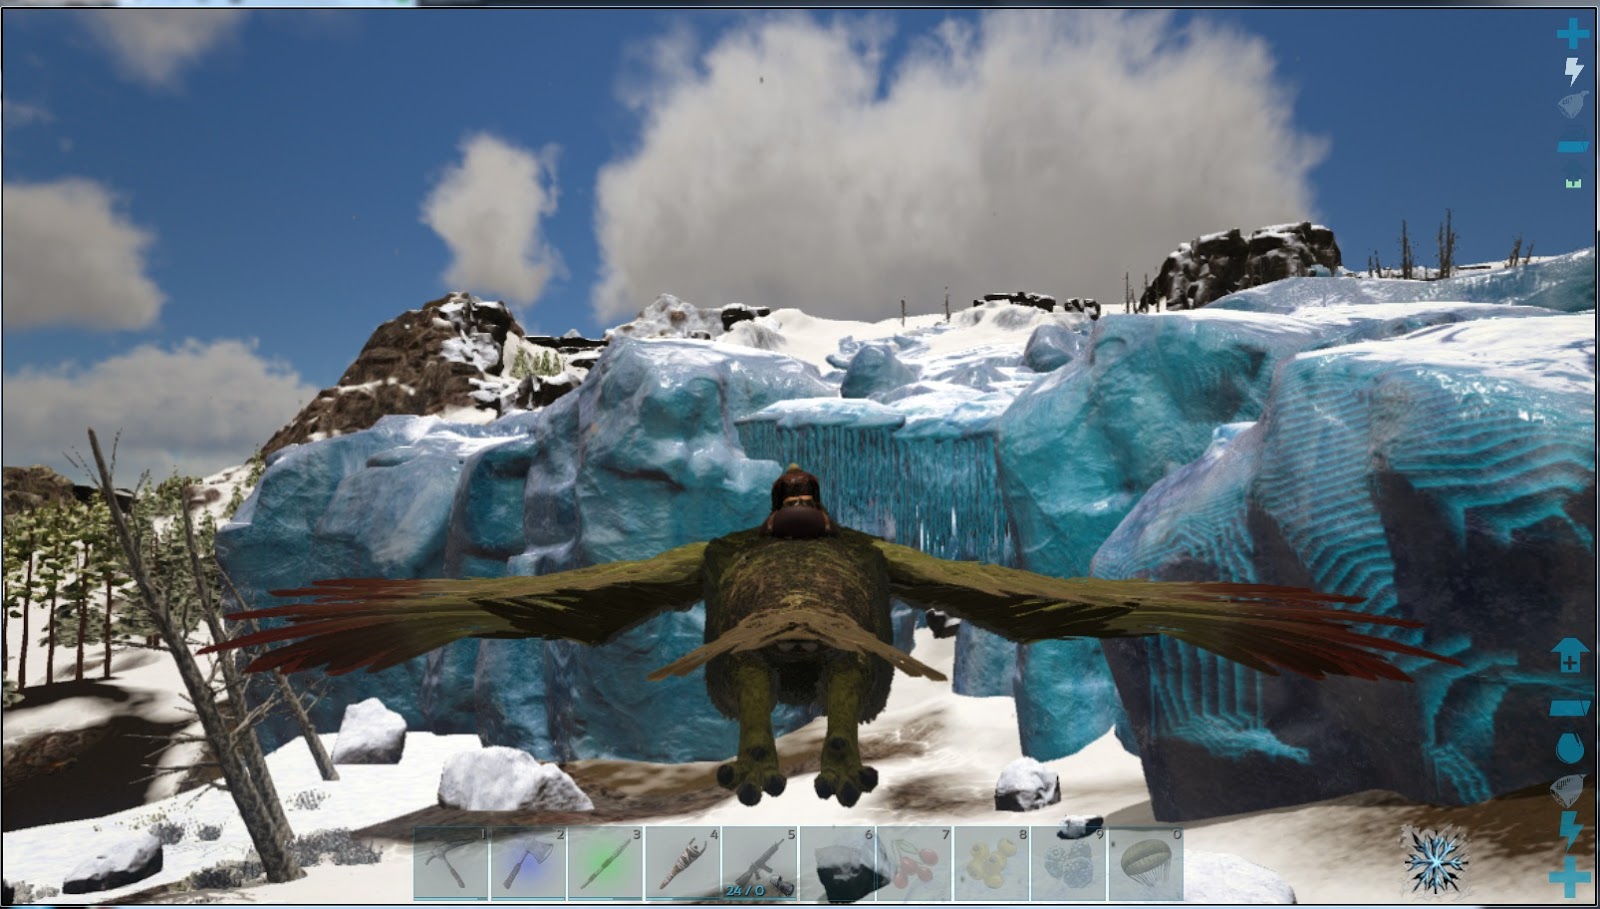 Sl Newser Other Grids Mmos And Games Ark Survival Evolved Update New Map New Version And Lots Of Mods